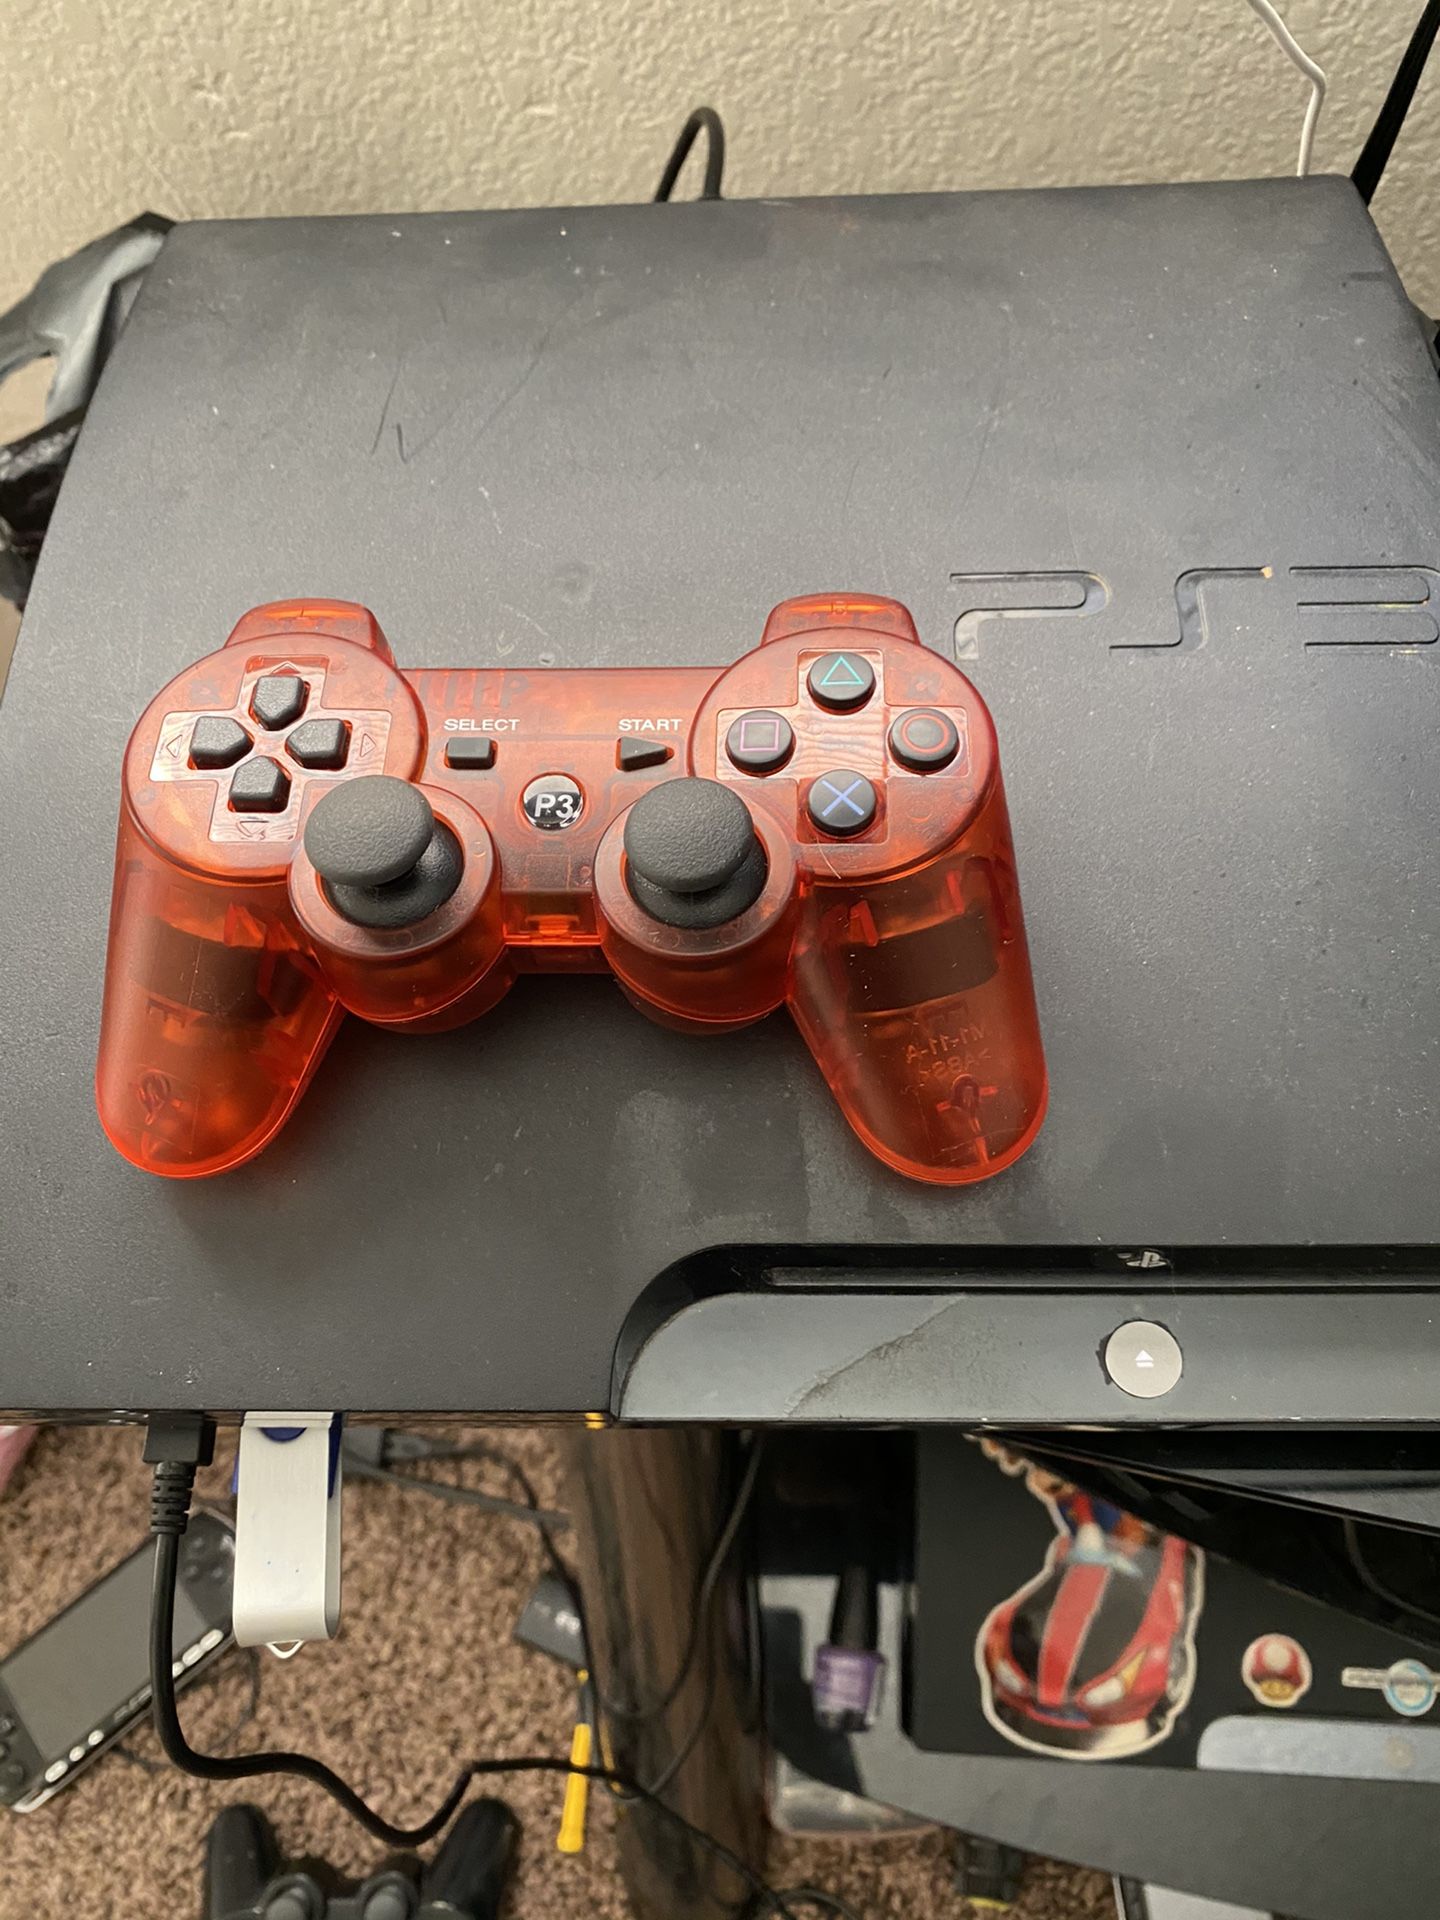 ModPs3 120 Gb 13 Games 2800 Retros. $130 Firm.leave Your Number .